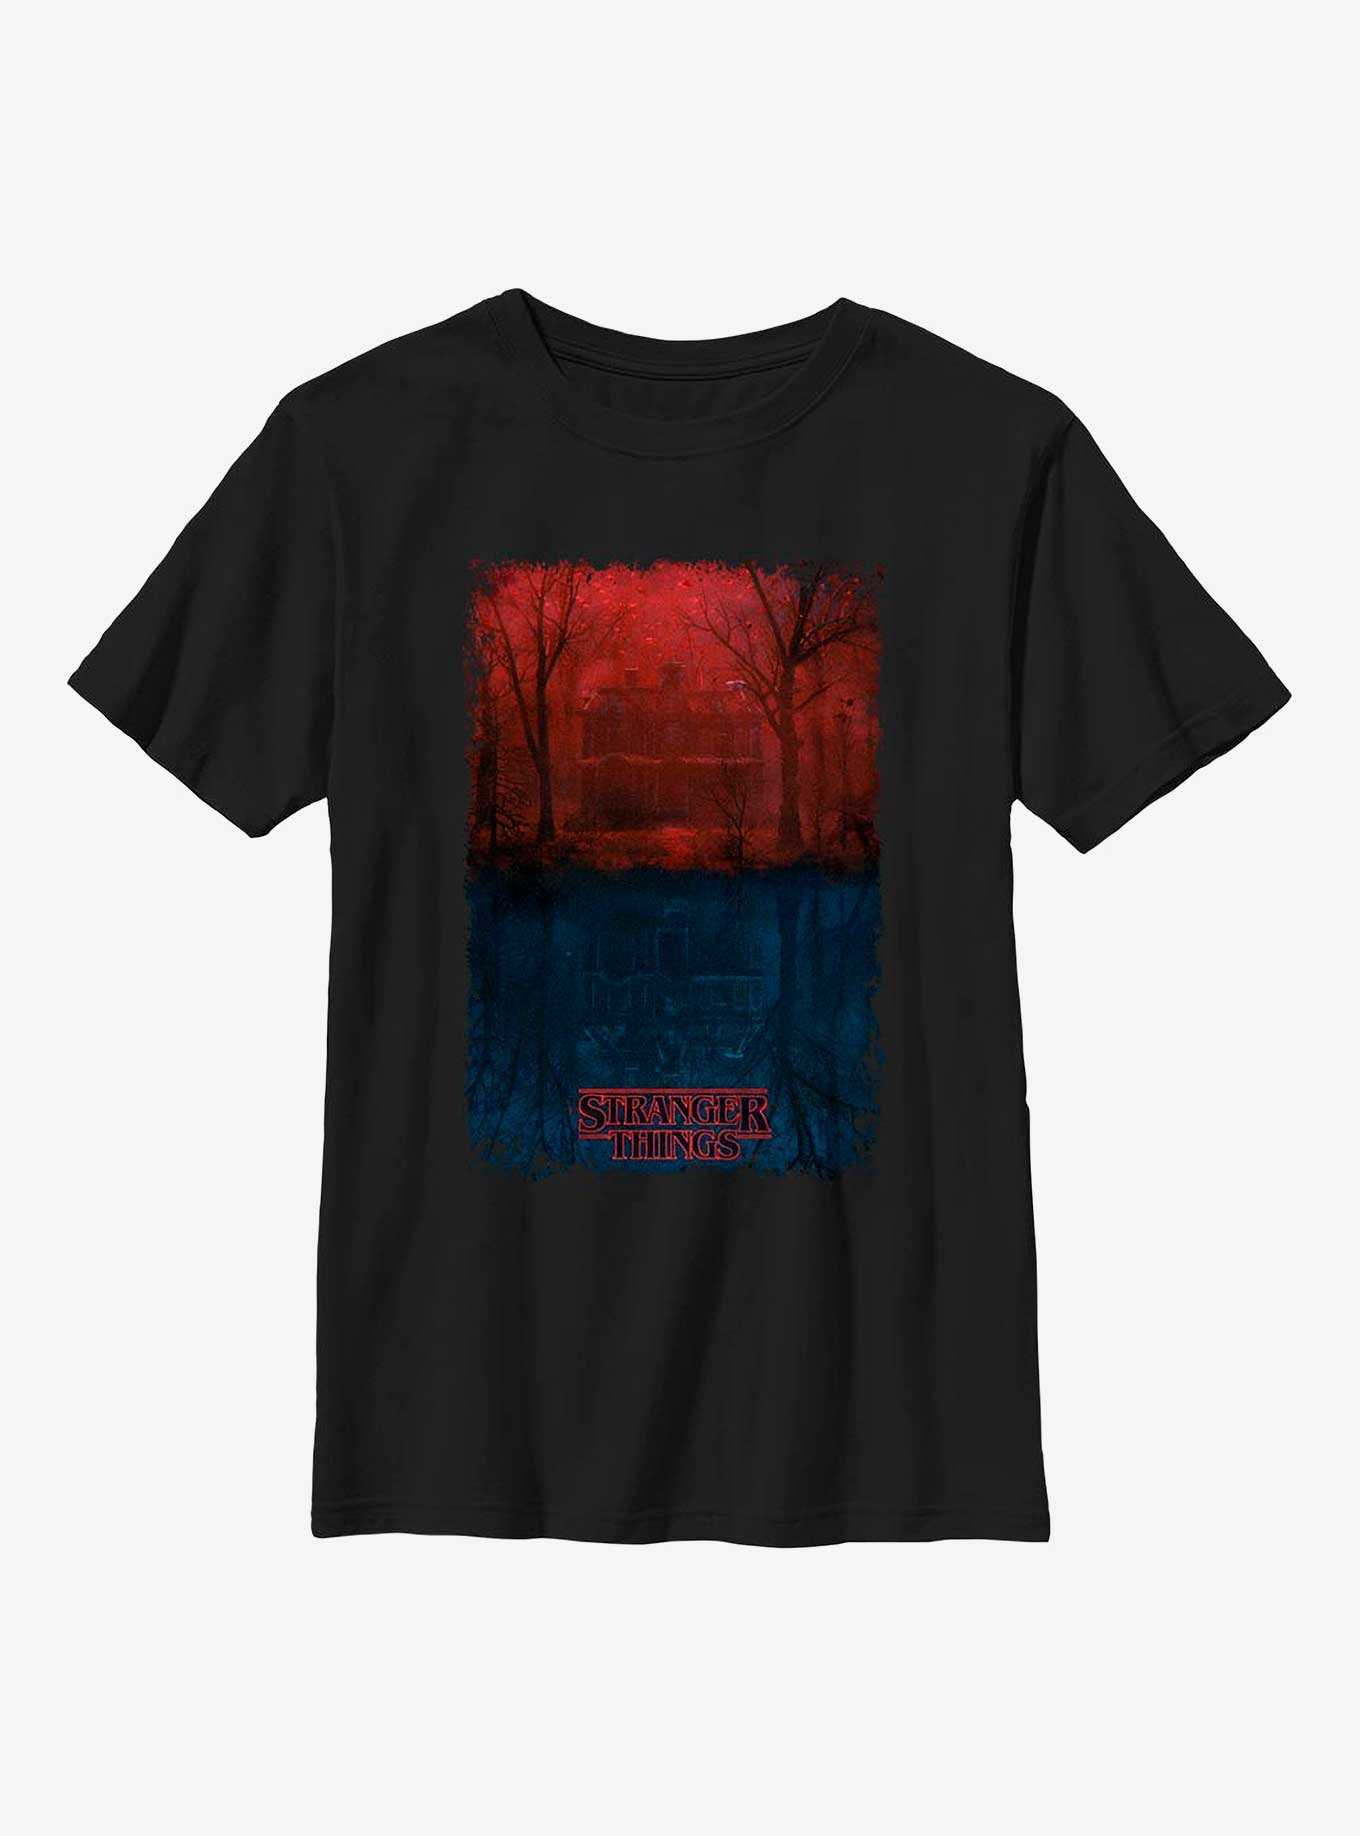 Stranger Things Creel House Upside Down Youth T-Shirt, , hi-res